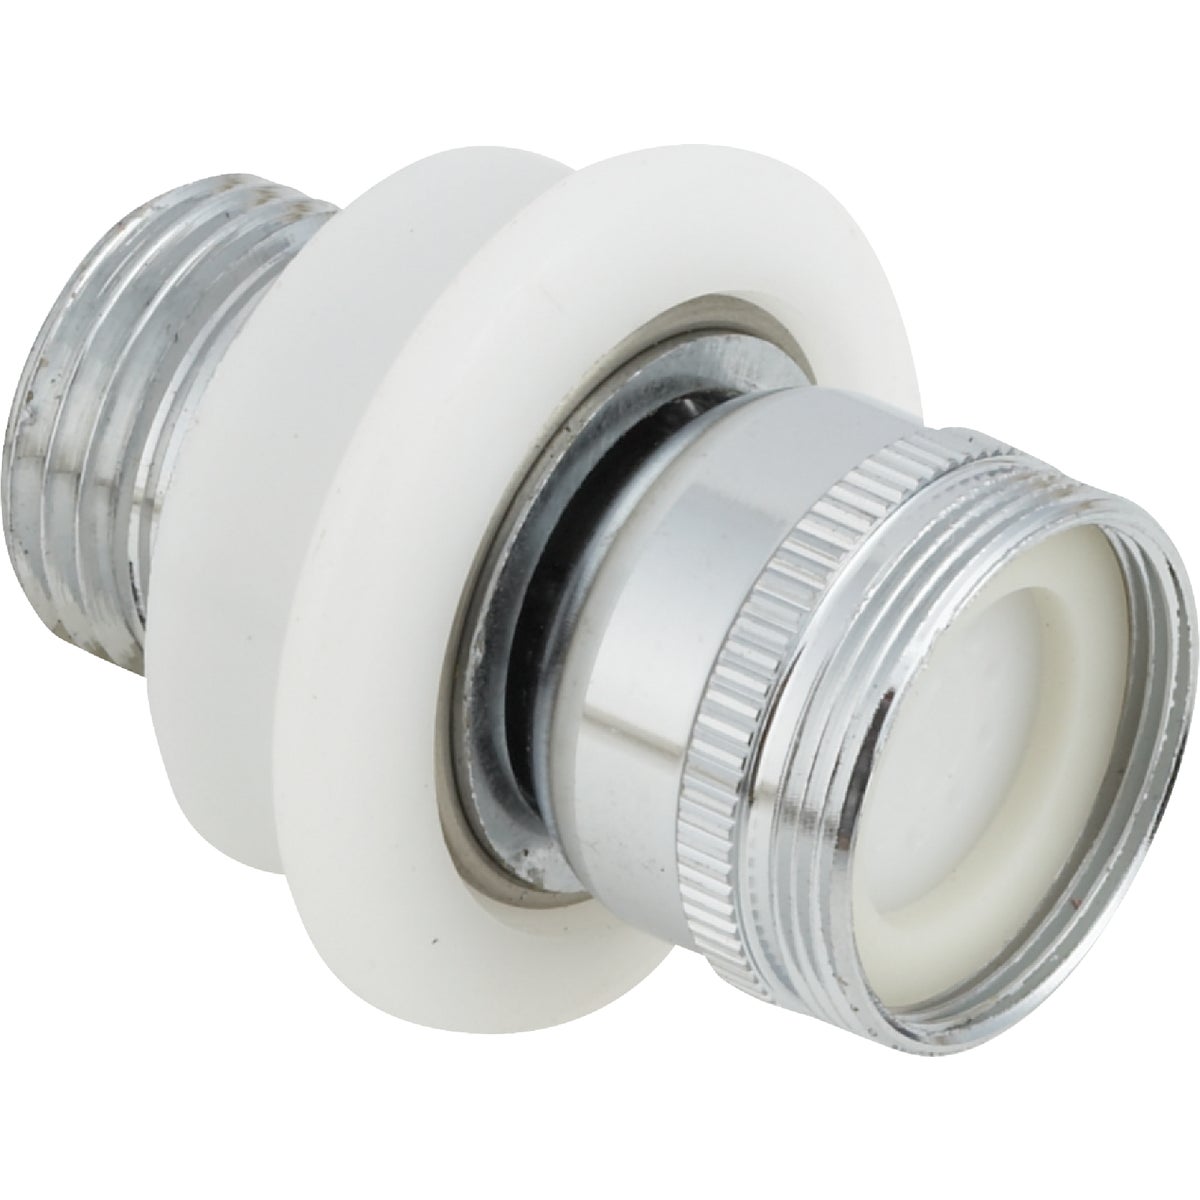 Item 408437, The 1/2" hose connector adapts Male or Female threaded faucets to Female 